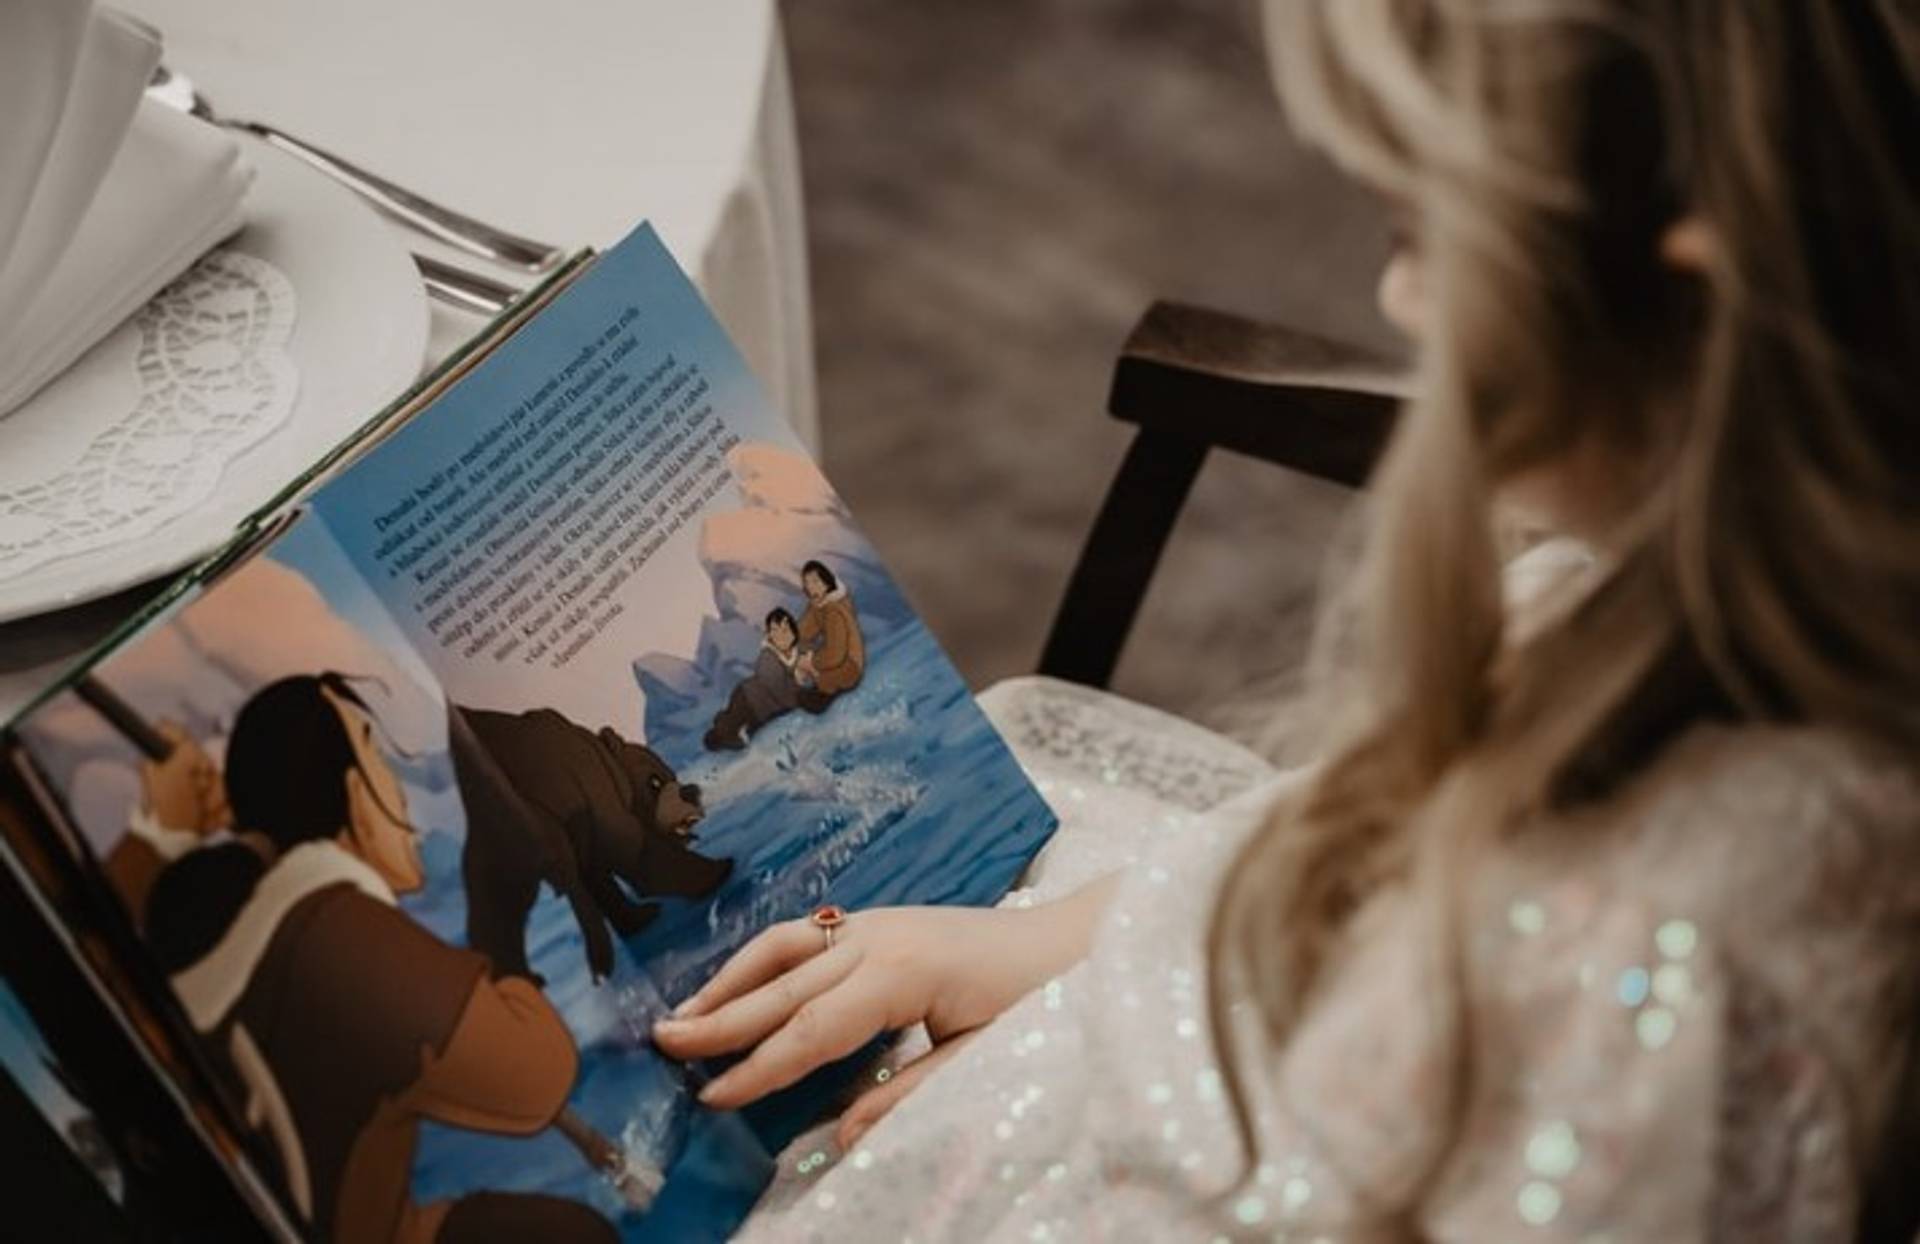 Kids look to influencers for reading inspiration